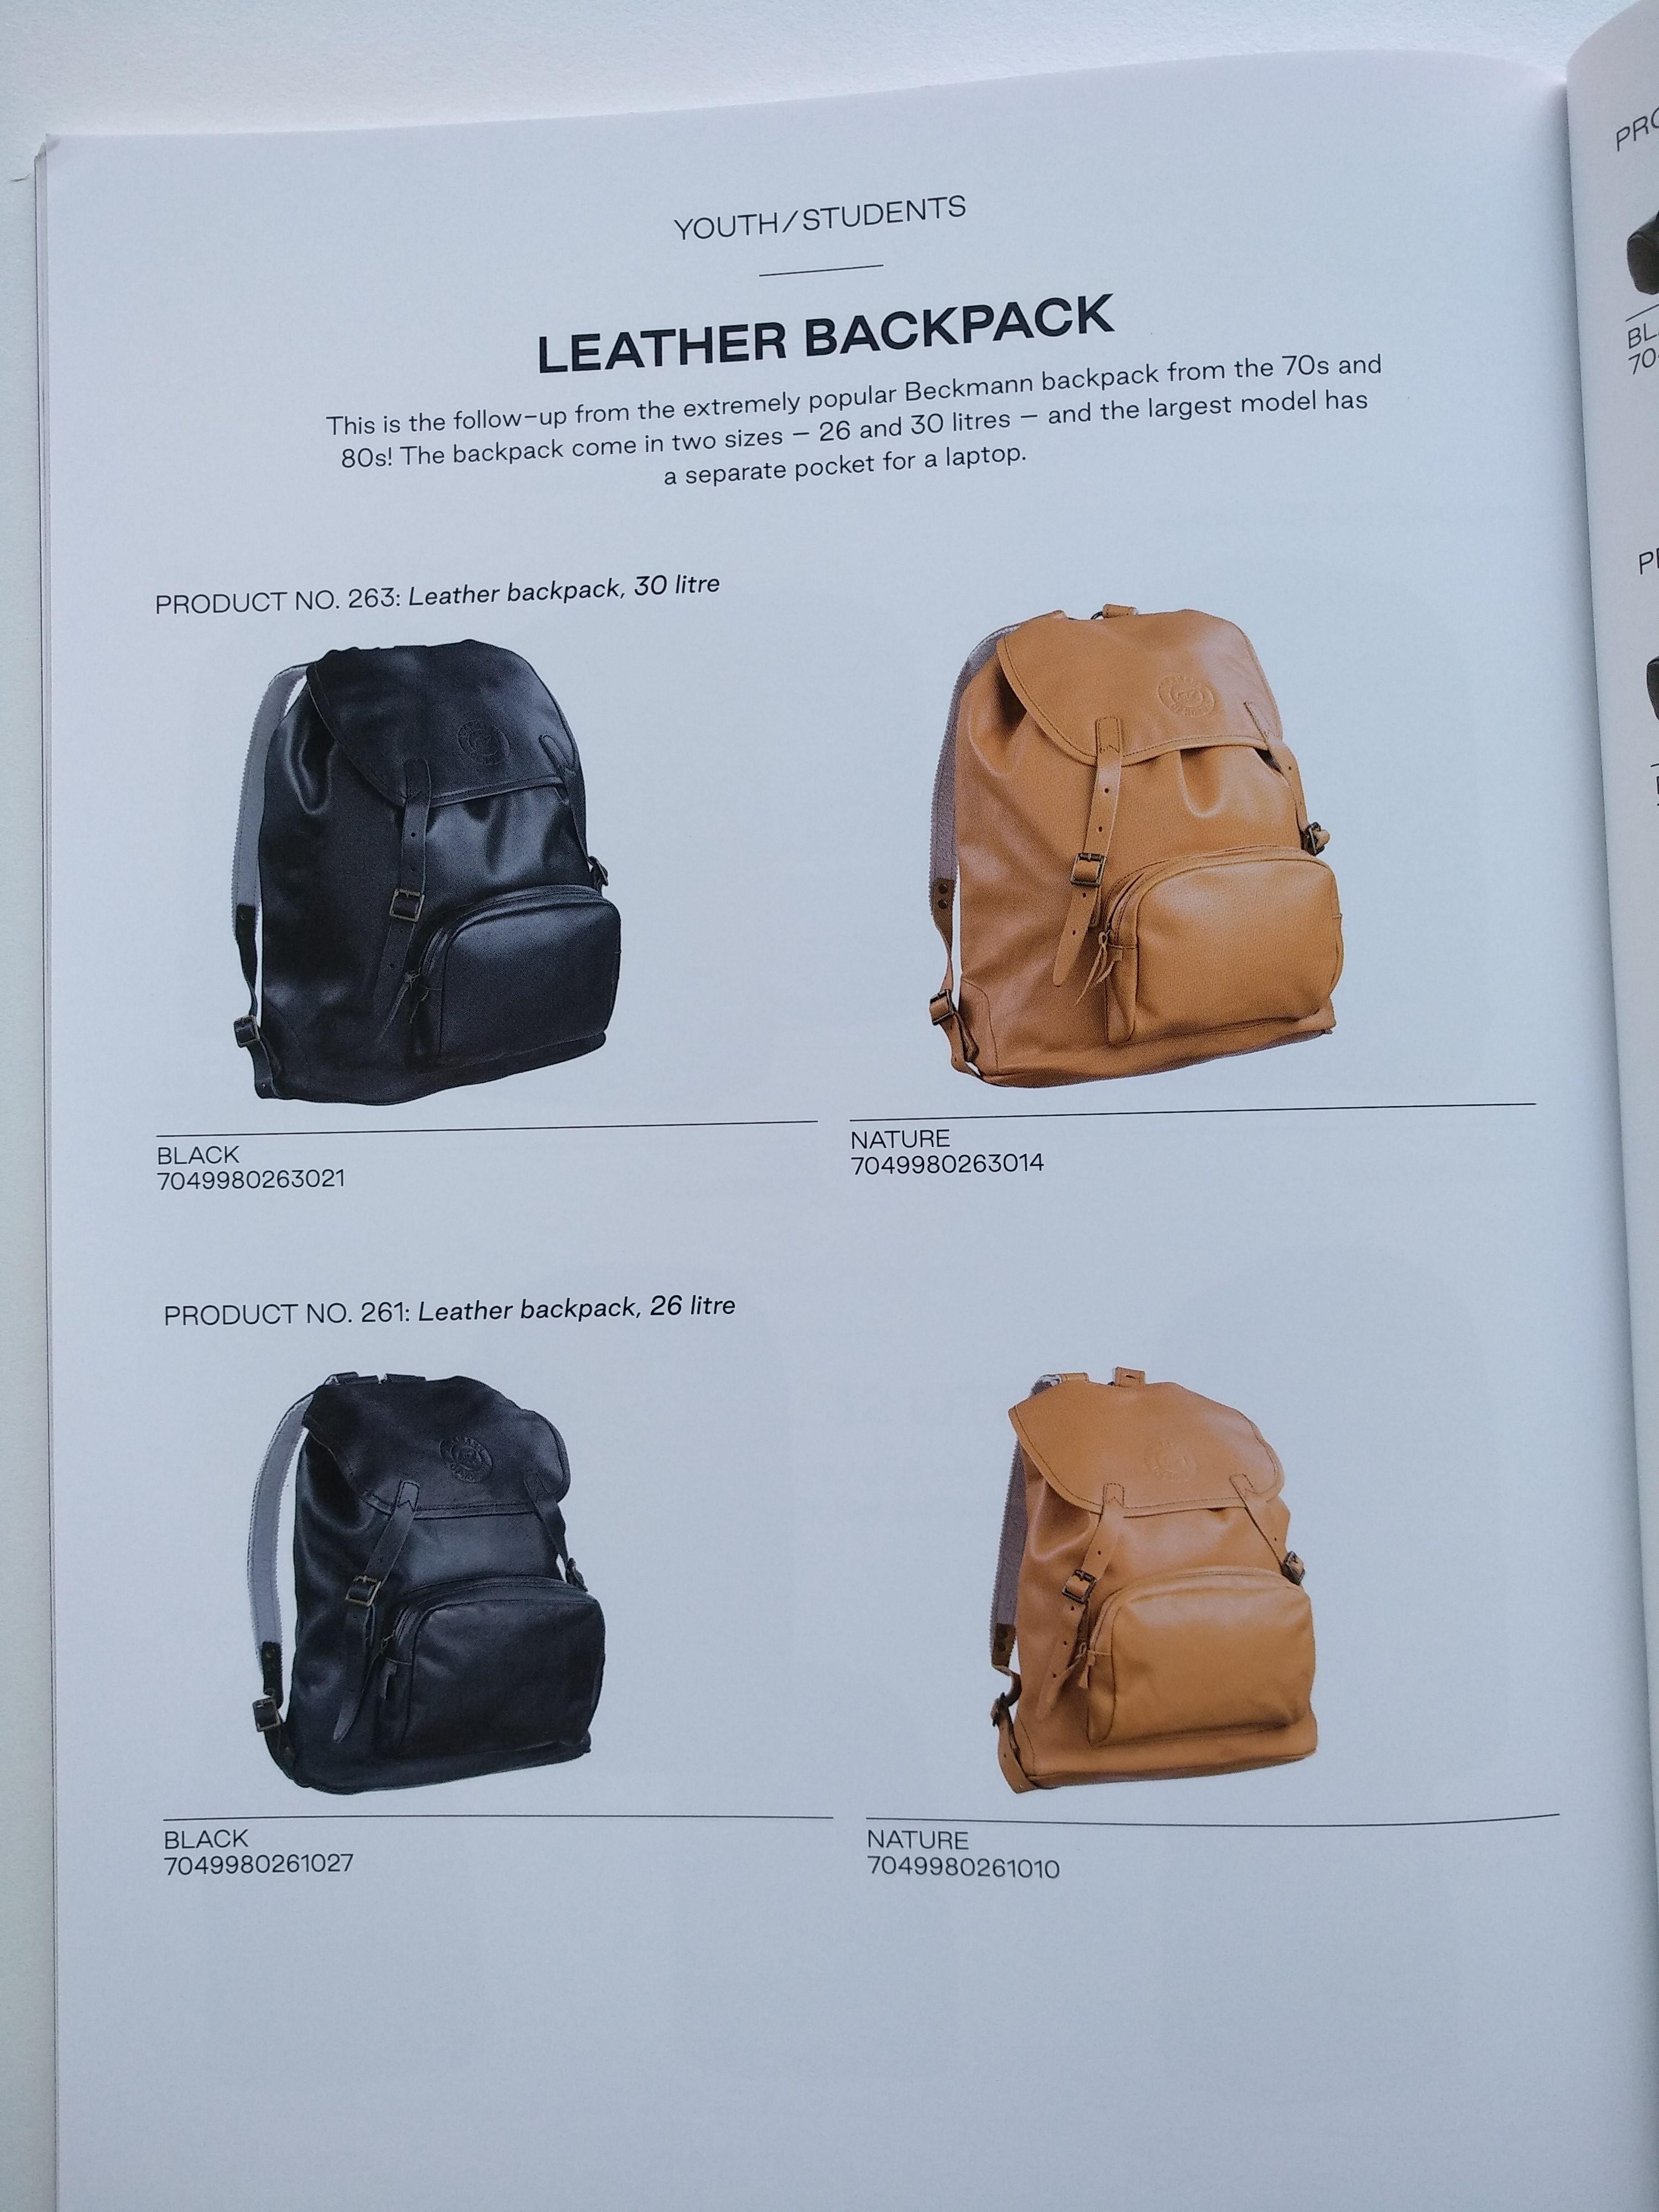 Leather backpack 18 liter, Nature - Beckmann Norway